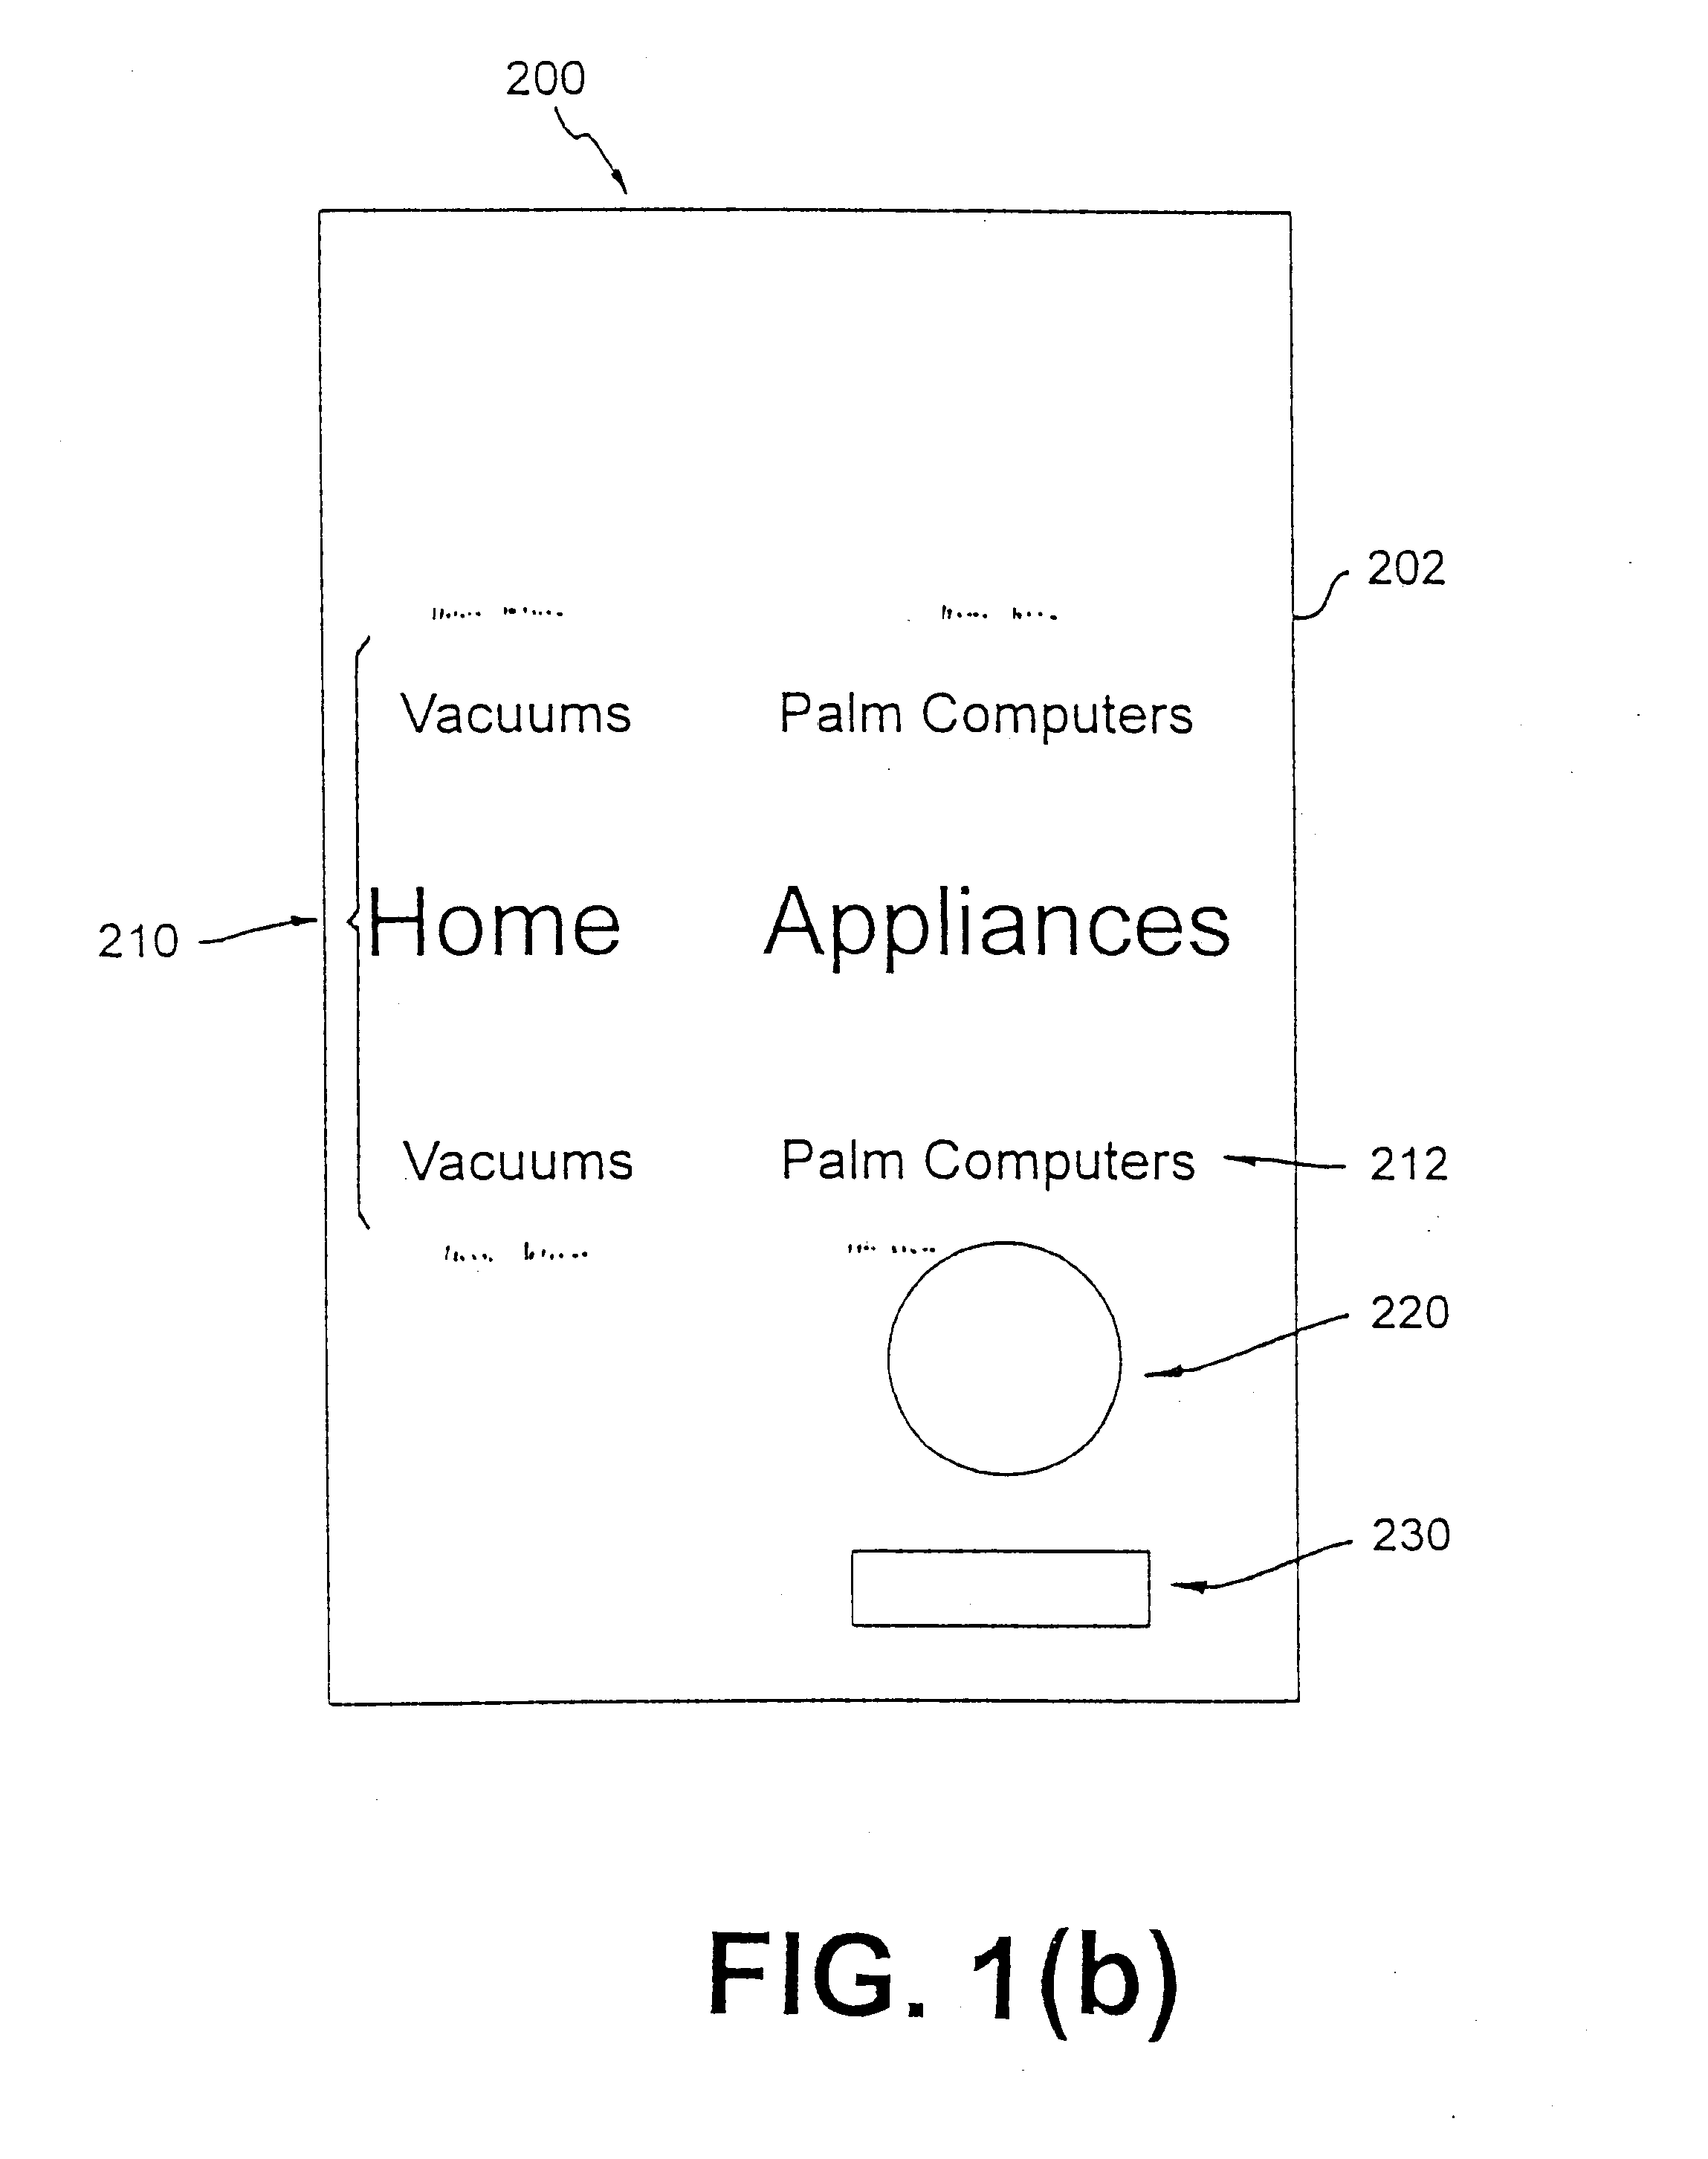 Information presentation system for a graphical user interface